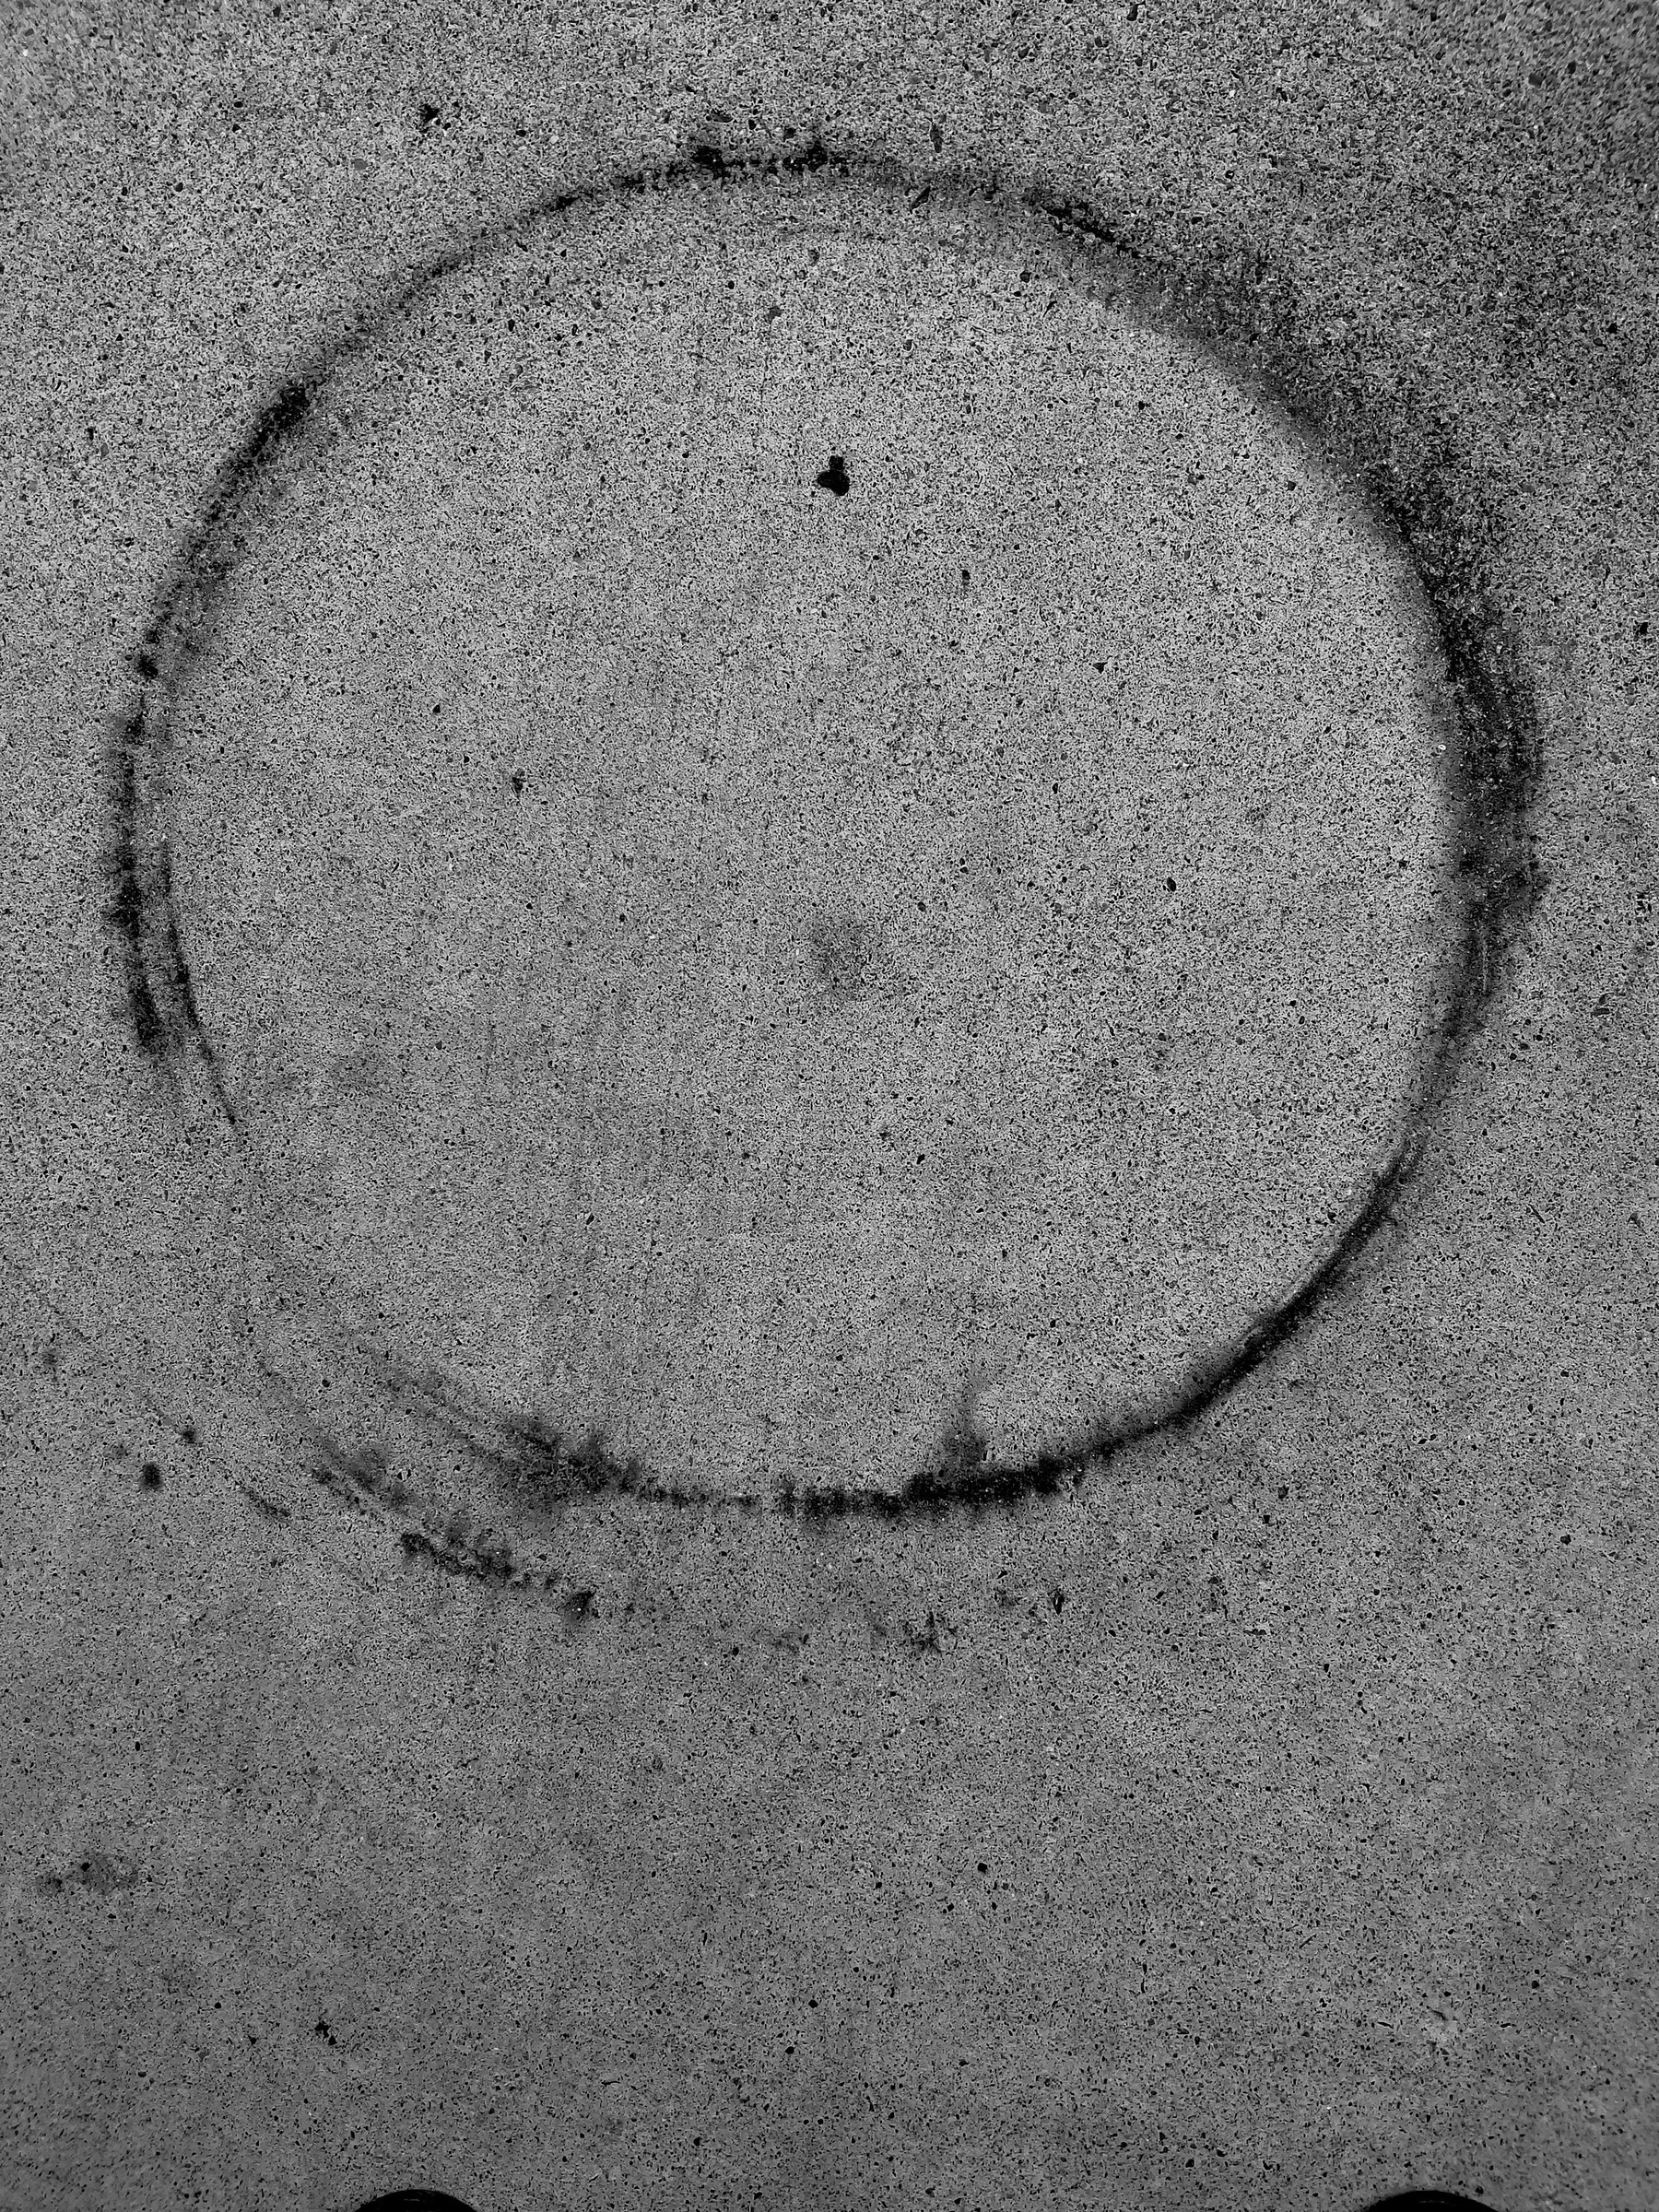 Circular rust stain on concrete pavement. Black and white.